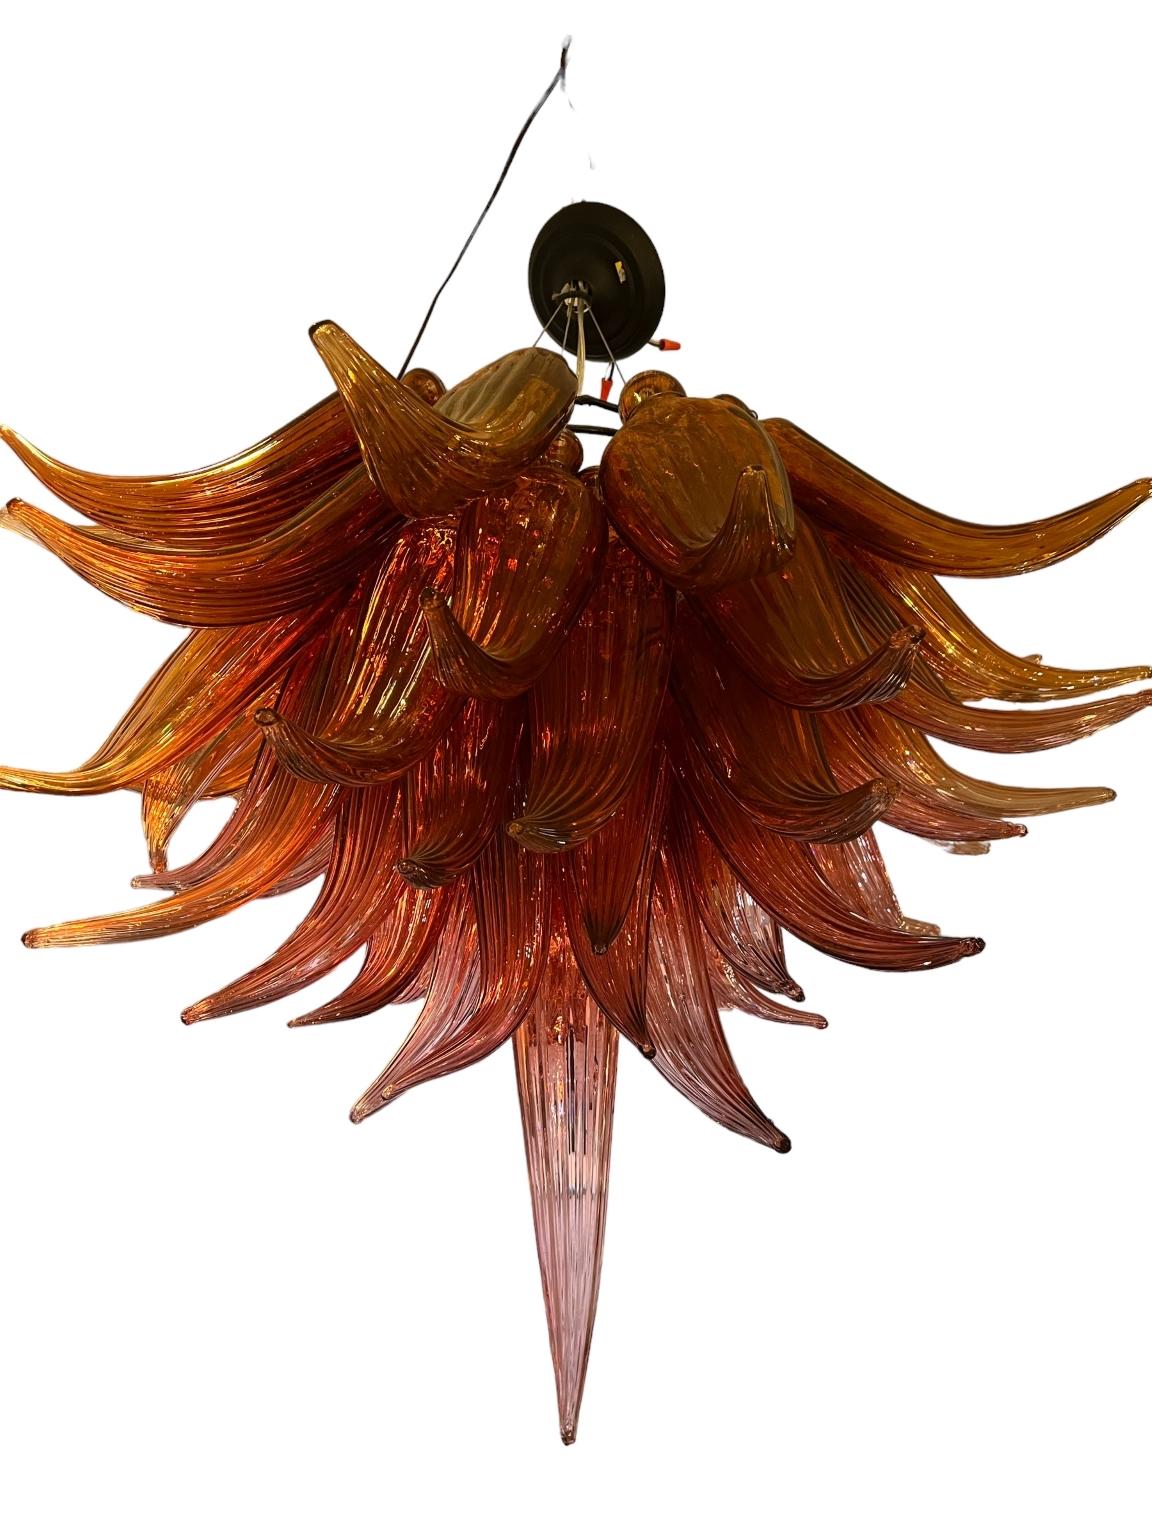 Beautiful hand blown studio glass chandelier in the style of American artist Dale Chihuly. Unique tulip shape with a beautiful pinkish orange hue. Circa 1980’s Dimensions 30-32 inches wide, 32-36 inches high.
Dale Chihuly has established himself as